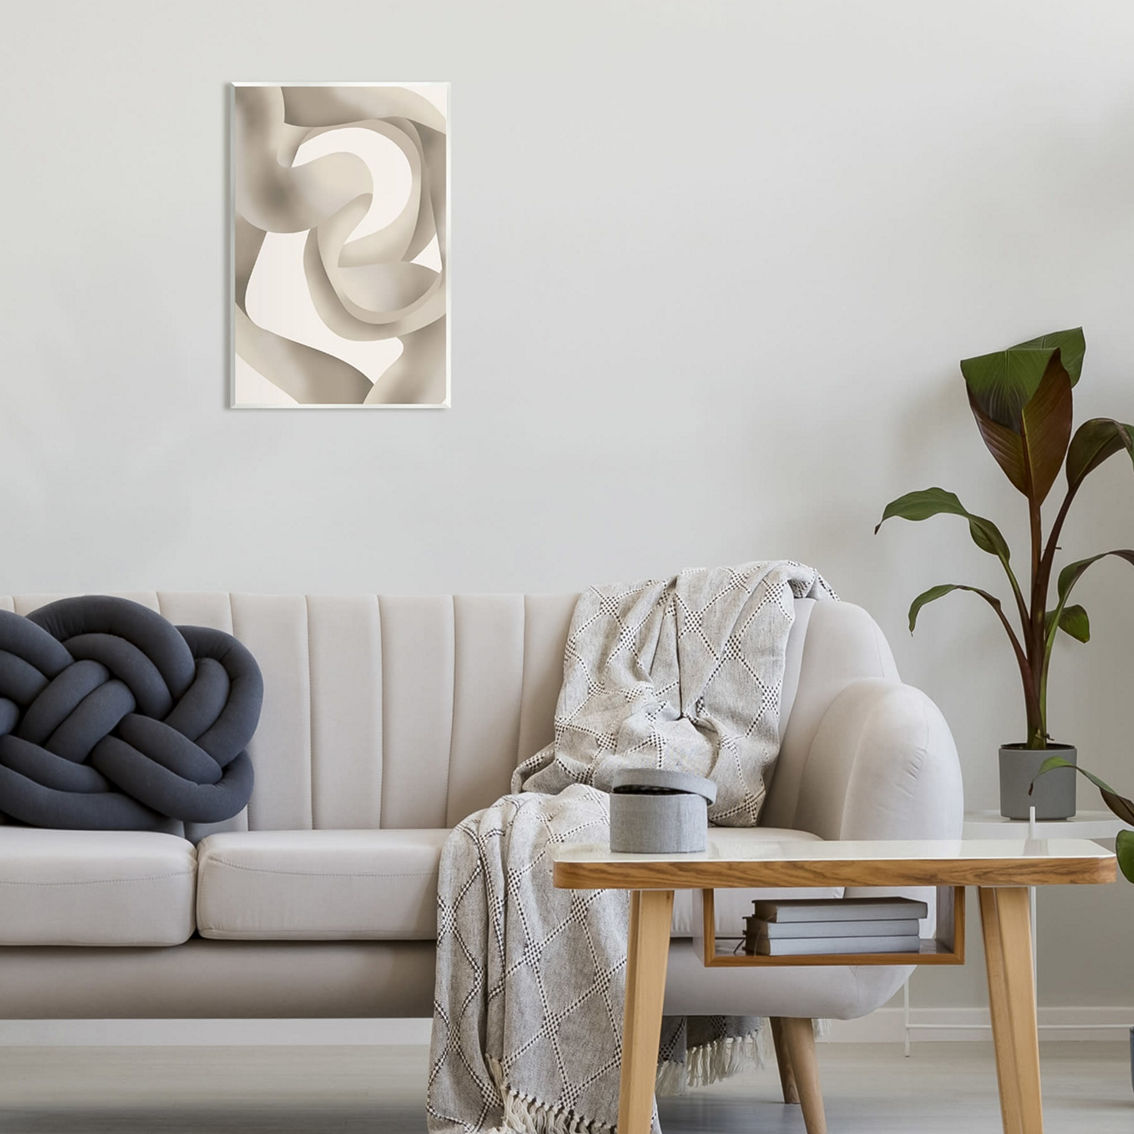 Stupell Wall Plaque Modern Wavy Abstraction , 13x19 - Image 2 of 2